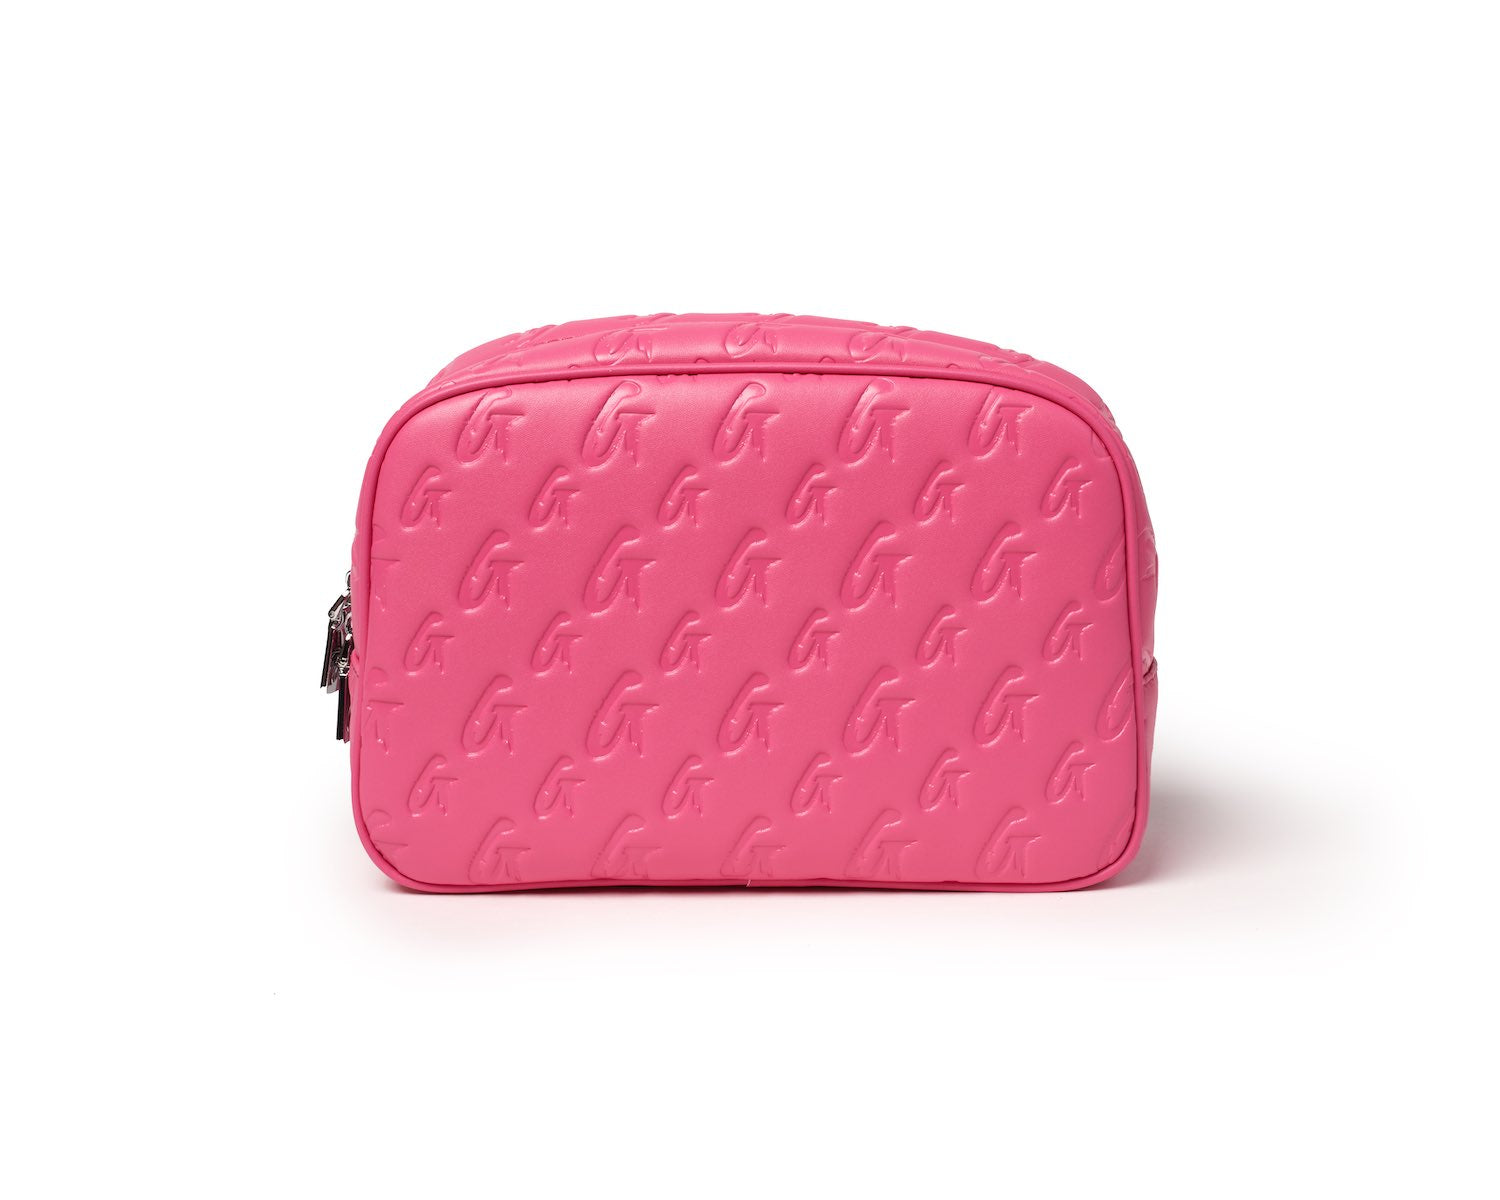 MONOGRAM SMALL COSMETIC TOILETRY BAG MATTE BLACK X PINK – Glam-Aholic  Lifestyle